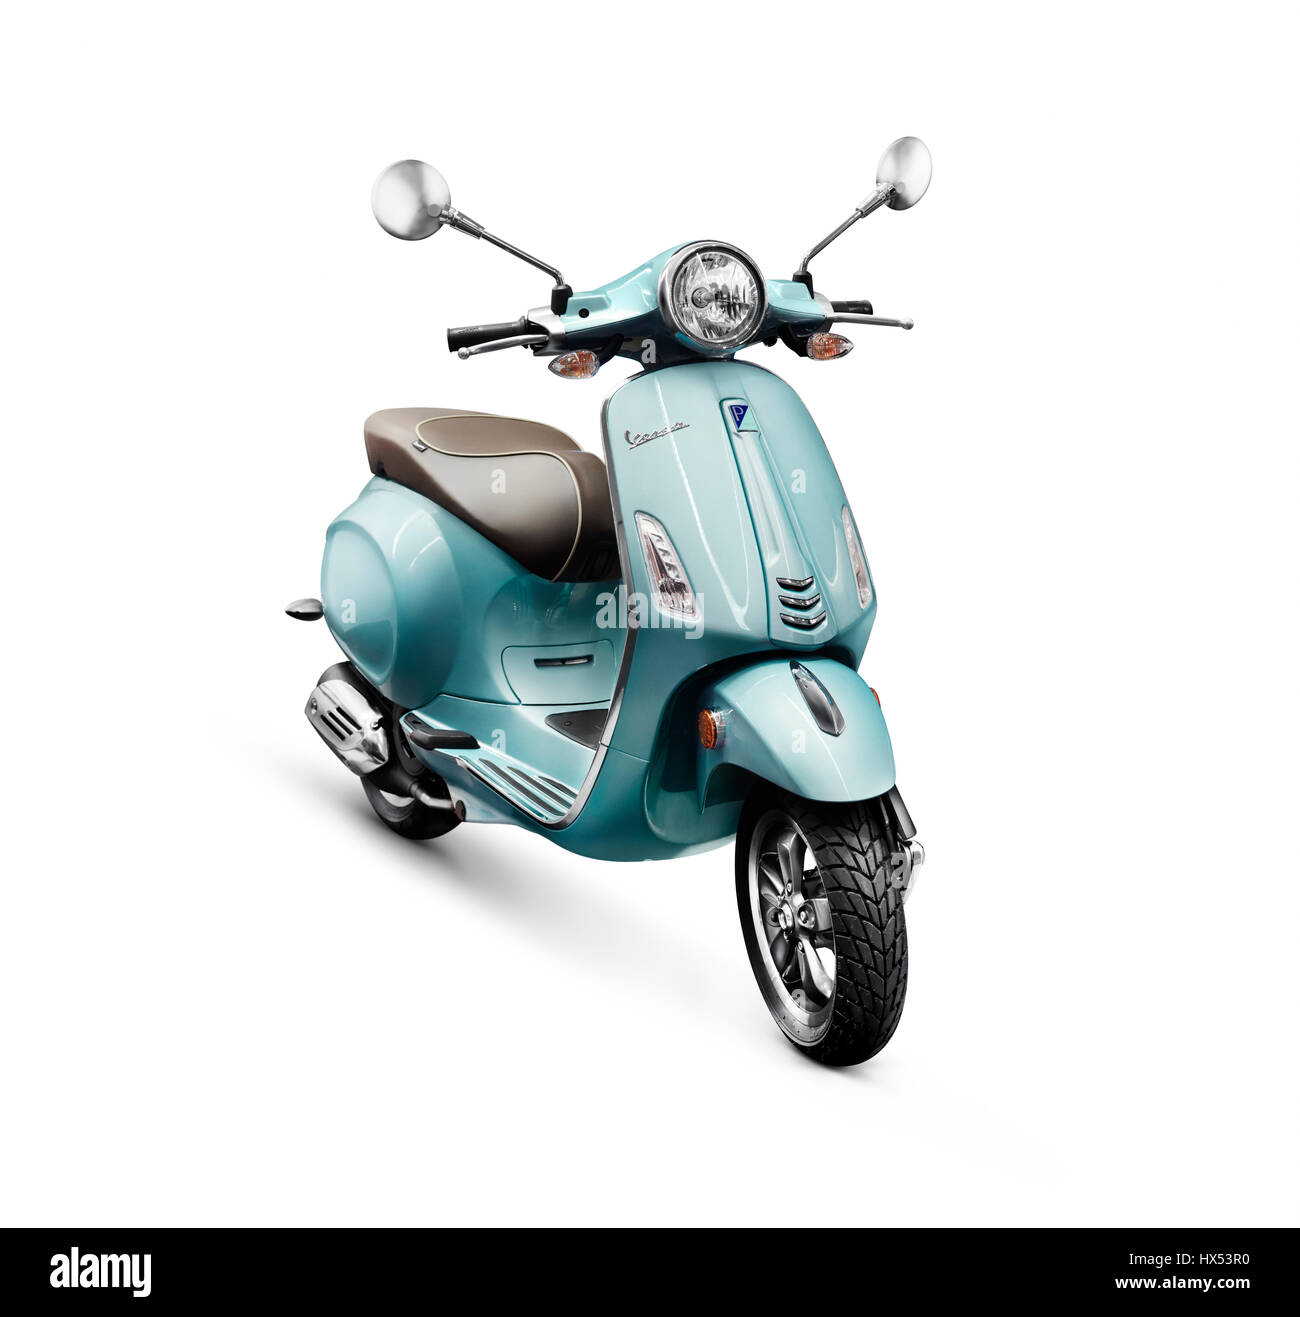 Blue 2017 motor scooter Vespa manufactured by isolated on white with clipping path Photo Alamy